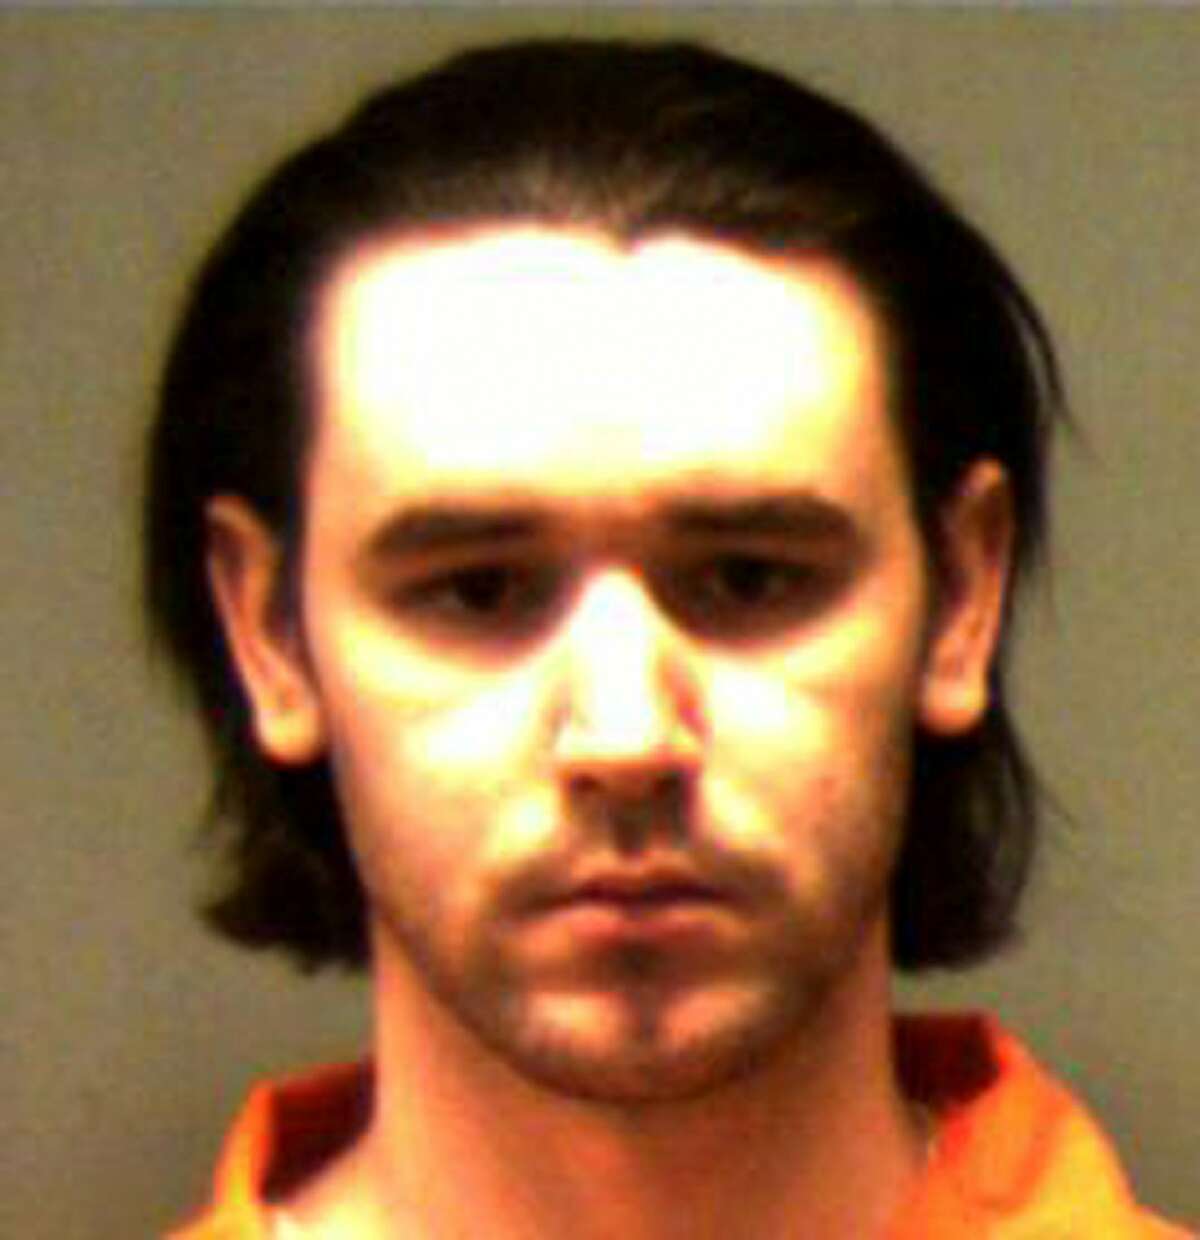 FILE - This undated file photo released by the Connecticut Department of Correction shows Joshua Komisarjevsky, sentenced to death on several counts related to the beating of Dr. William Petit Jr., and killing his wife Jennifer Hawke-Petit and their two daughters in a July 2007 home invasion in Cheshire, Conn.